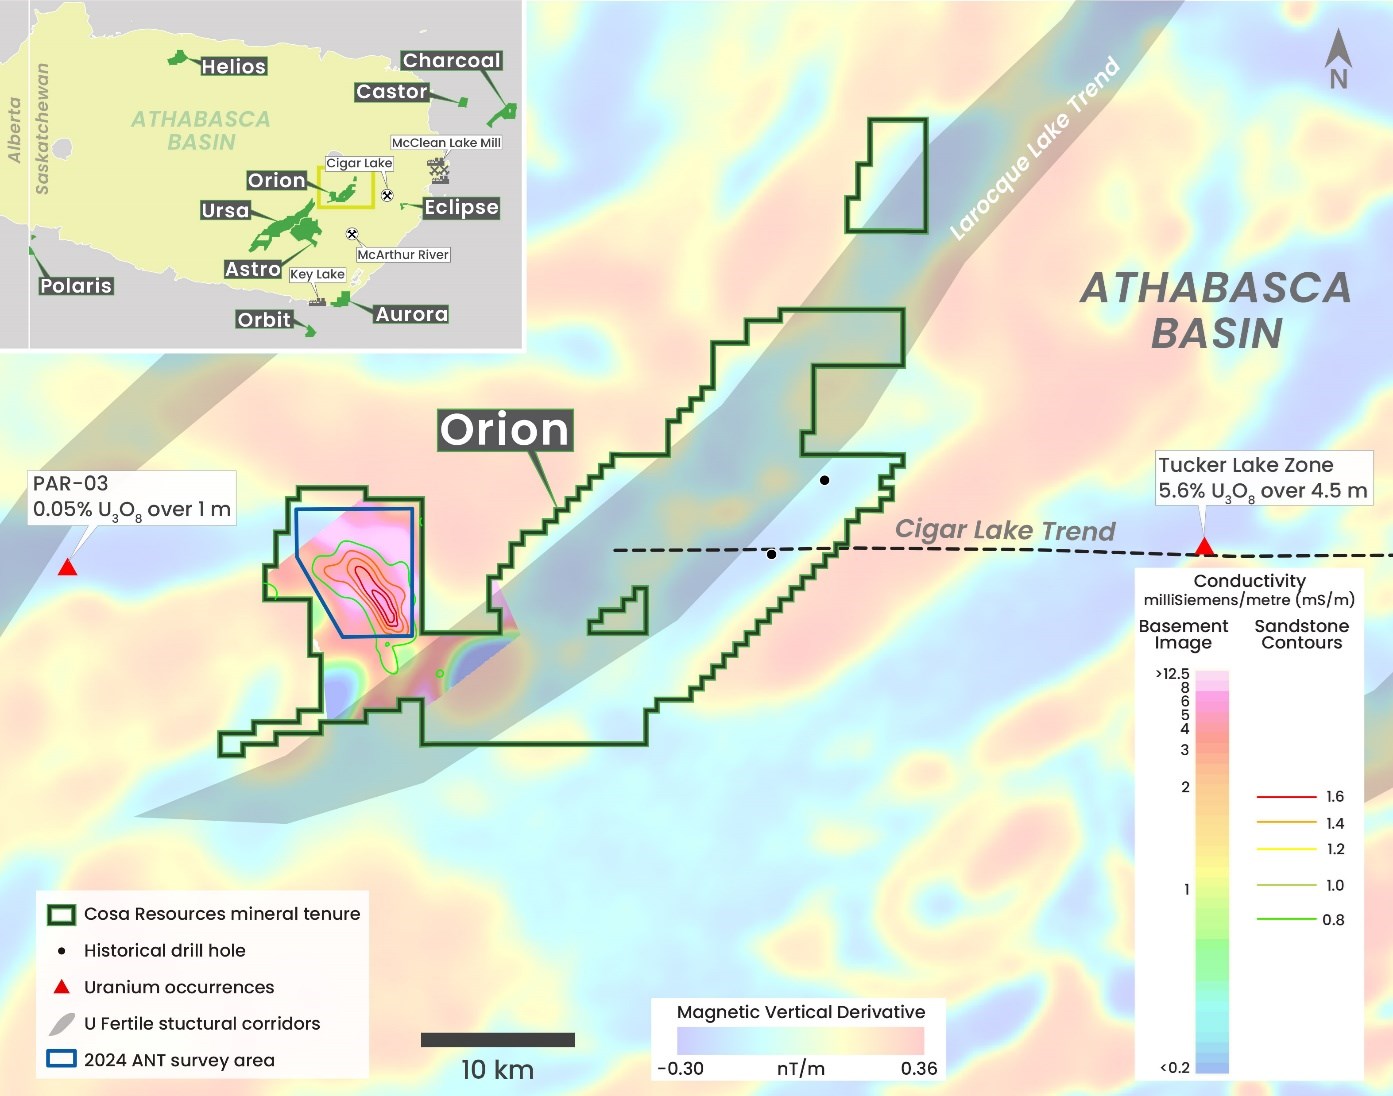 Ursa ANT Survey Areas Cosa Resources Announces Summer Exploration Plans for Athabasca Basin Uranium Projects